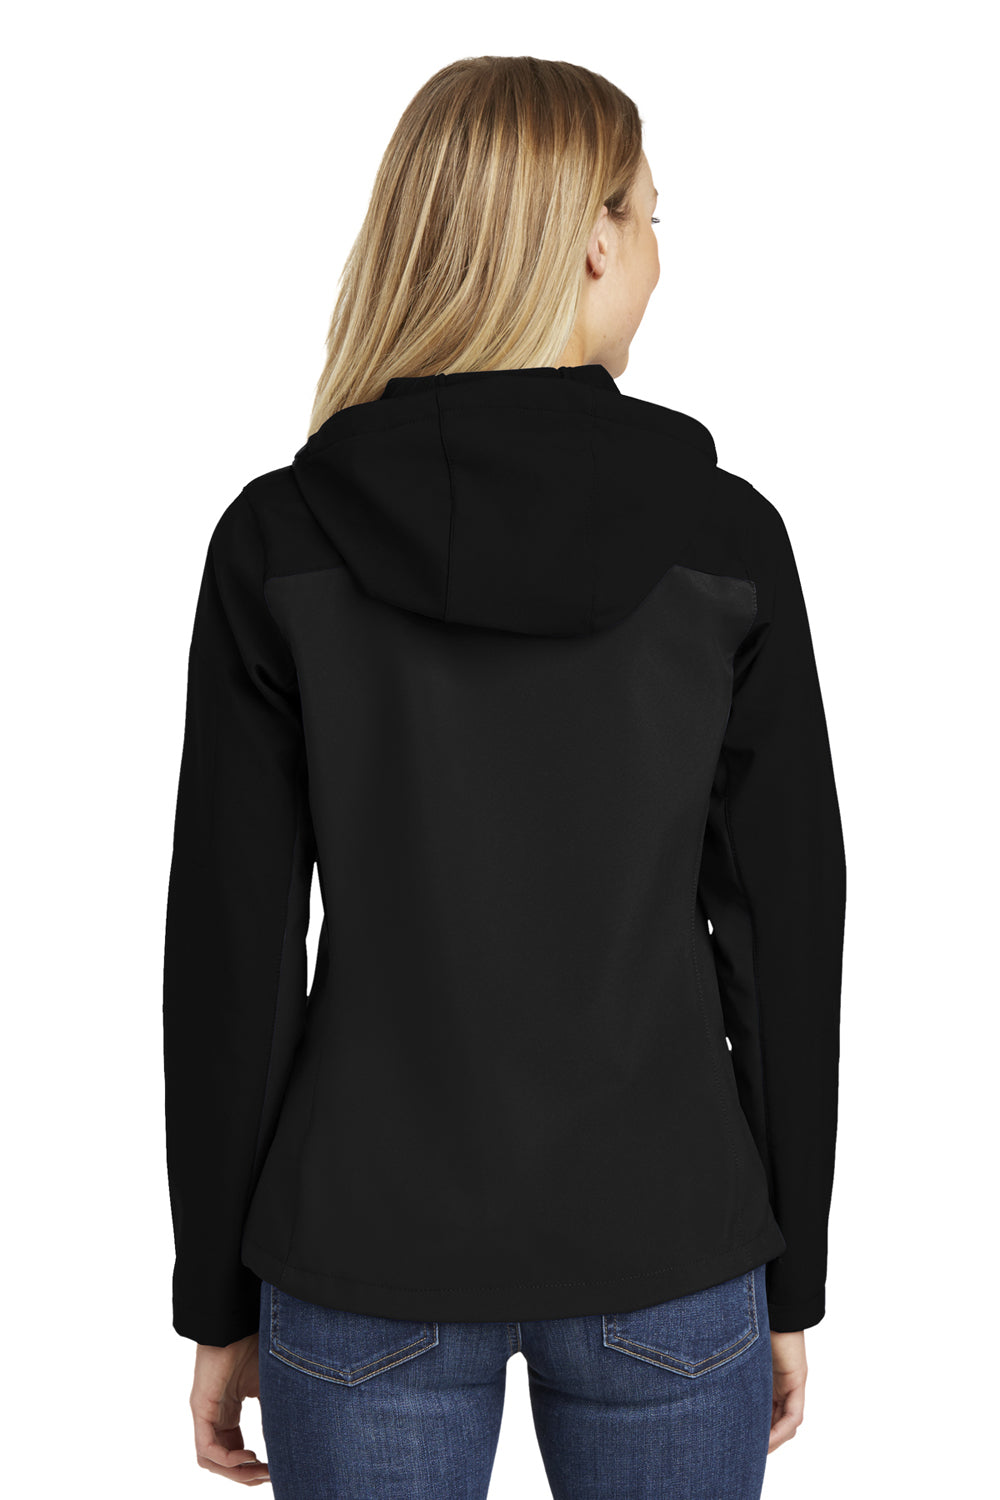 Port Authority L335 Womens Core Wind & Water Resistant Full Zip Hooded Jacket Black Back